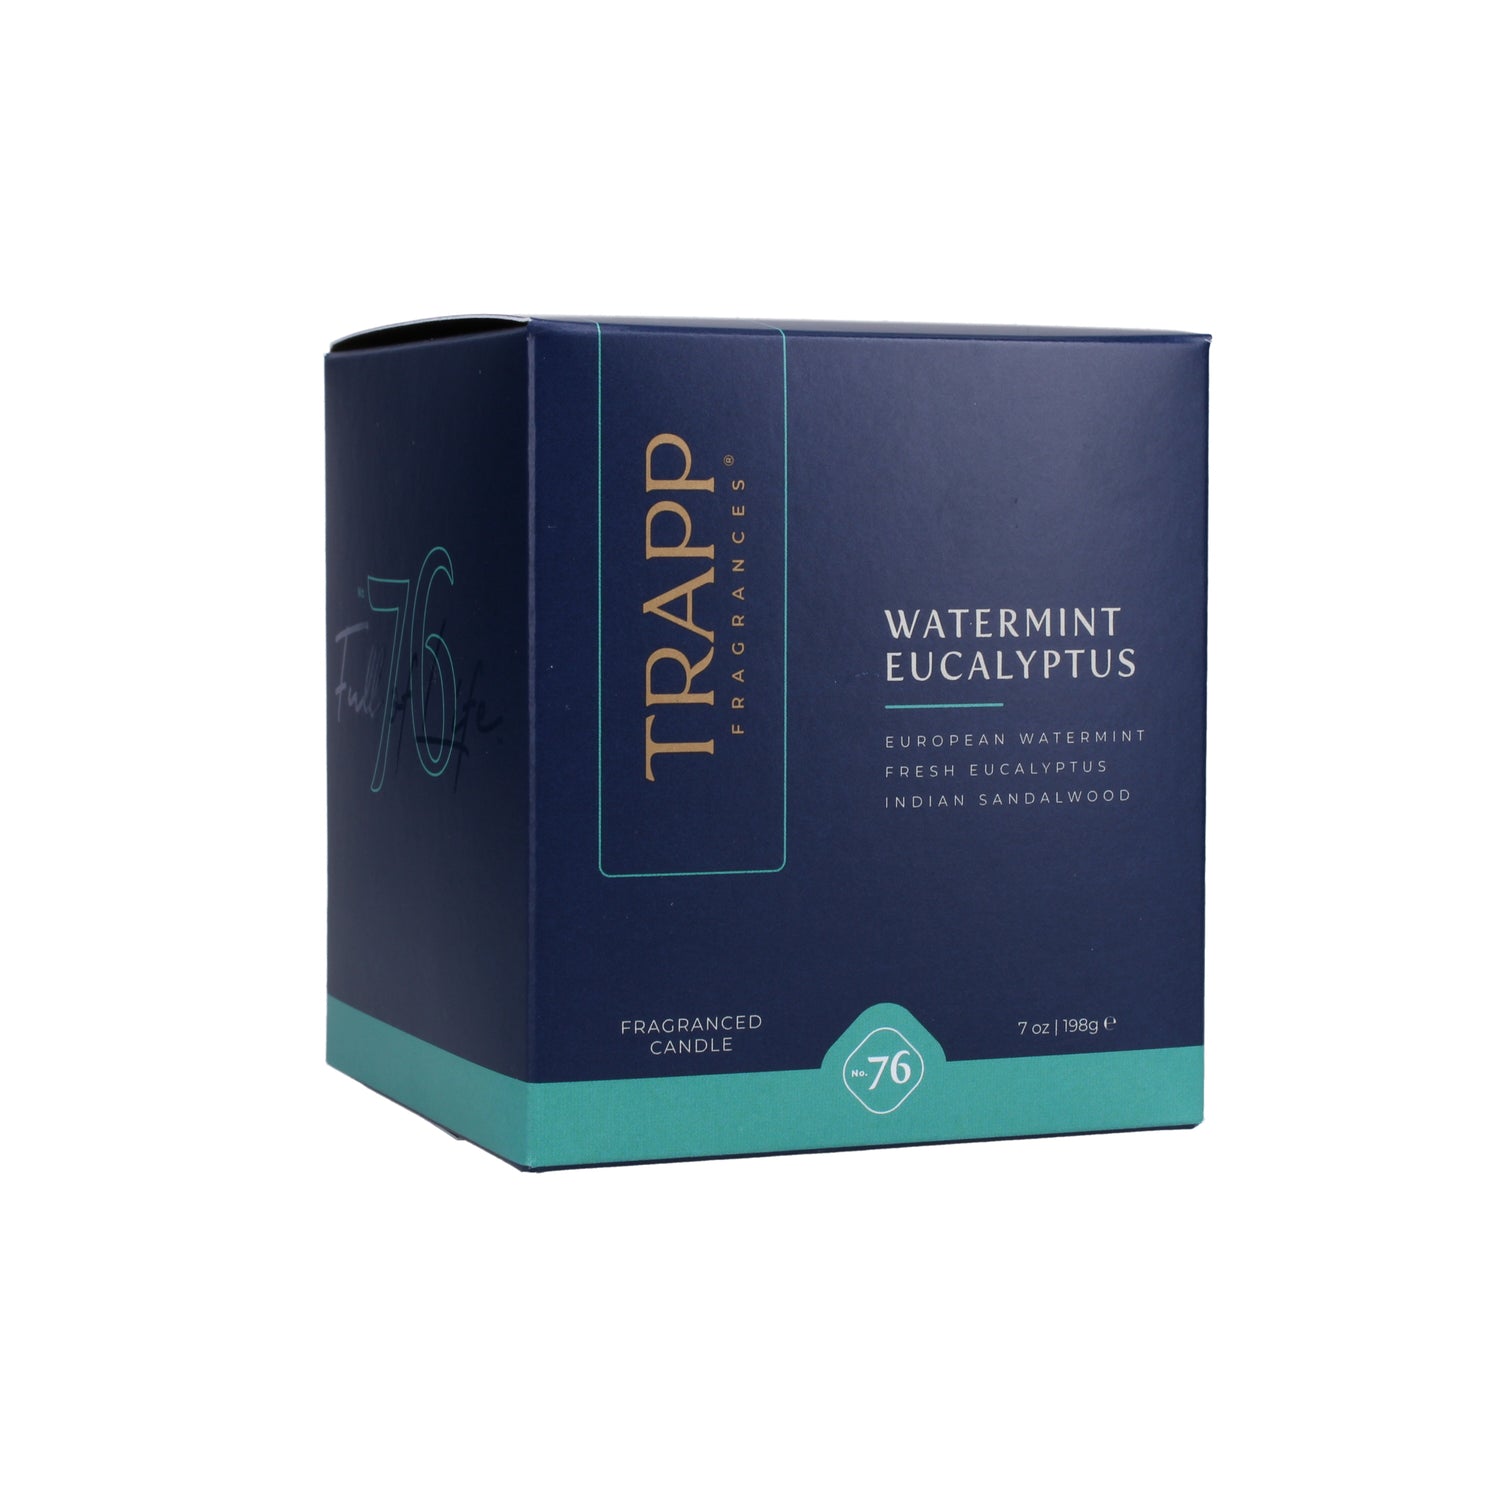 No. 76 Watermint Eucalyptus 7 oz. Candle in Signature Box Image 7